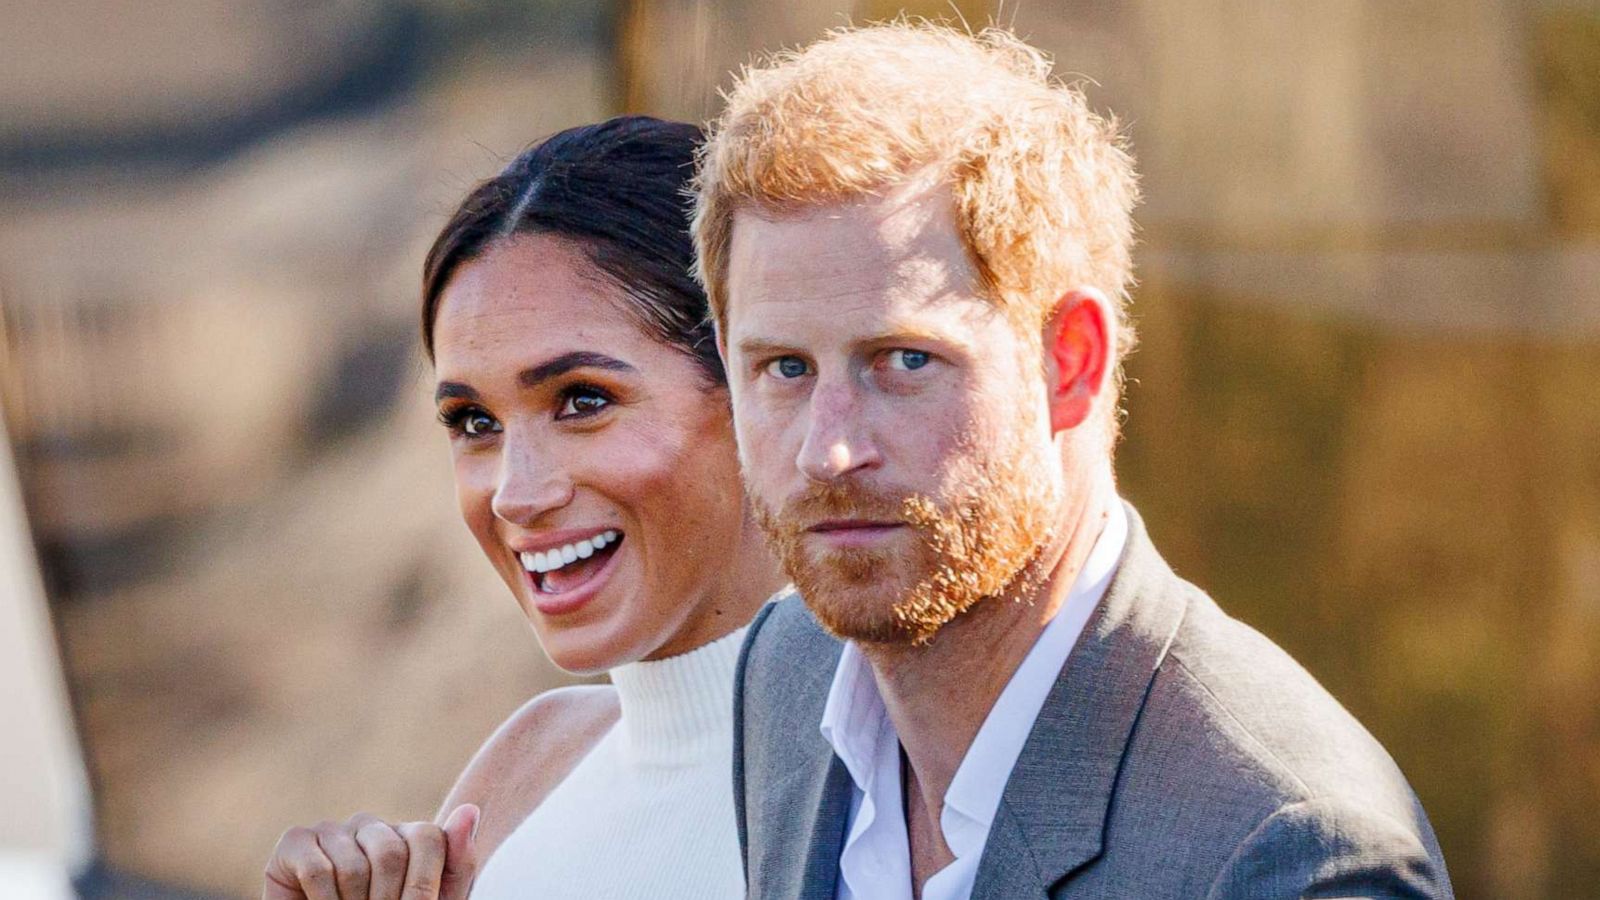 King Charles asked Harry and Meghan to move out of Frogmore Cottage: Reports